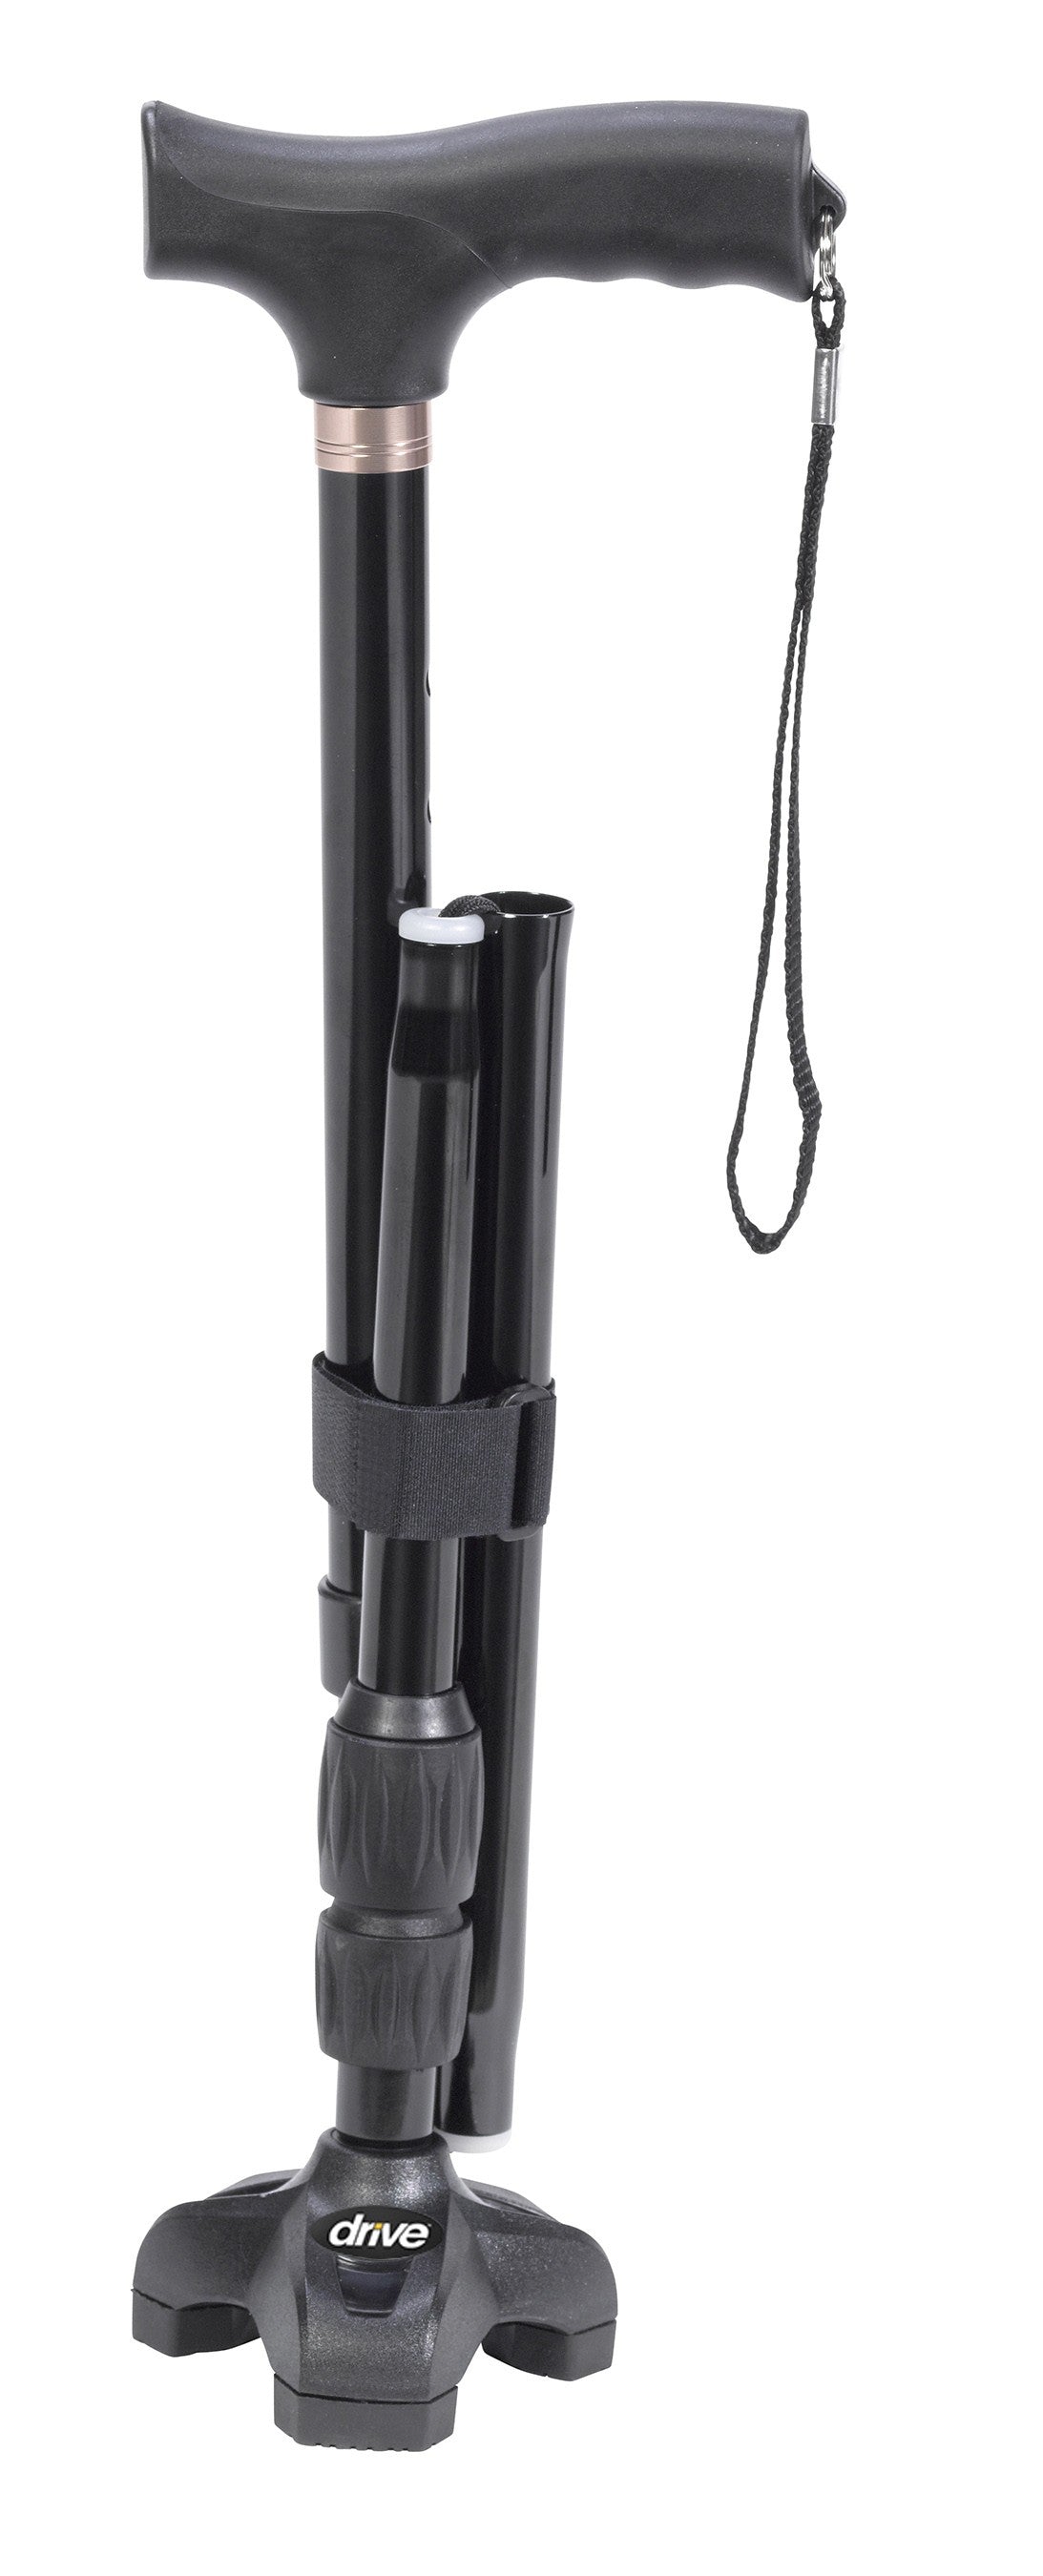 Drive Blind Folding Cane with Wrist Strap - Just Walkers